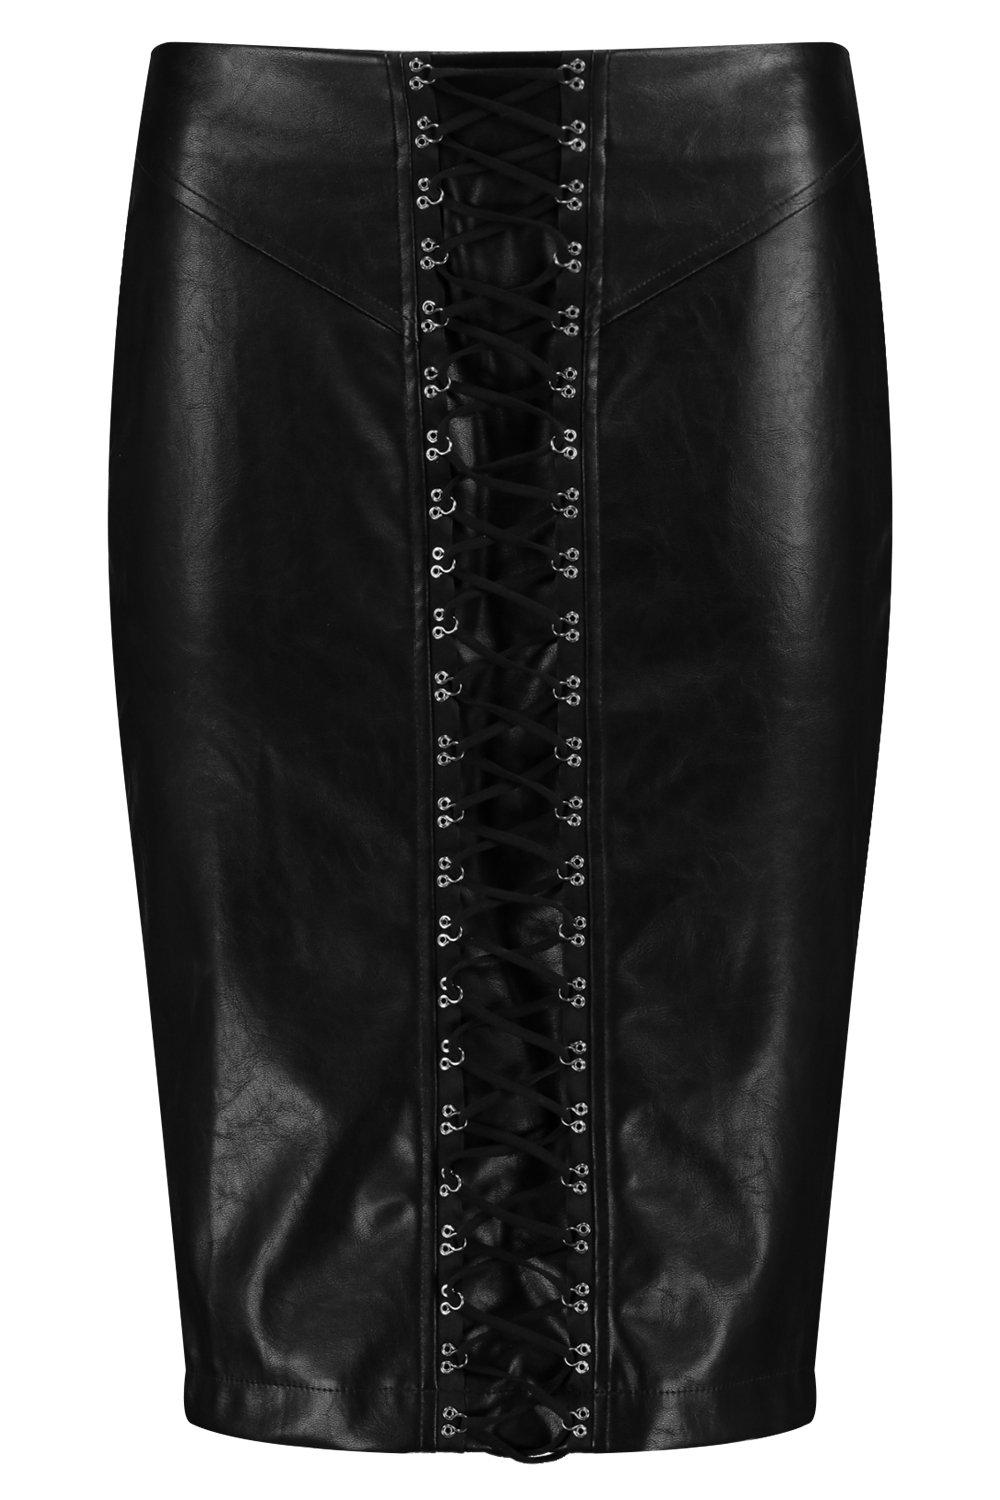 Jessica Lace-Up Vegan Leather Skirt | Shop Clothes at Nasty Gal!